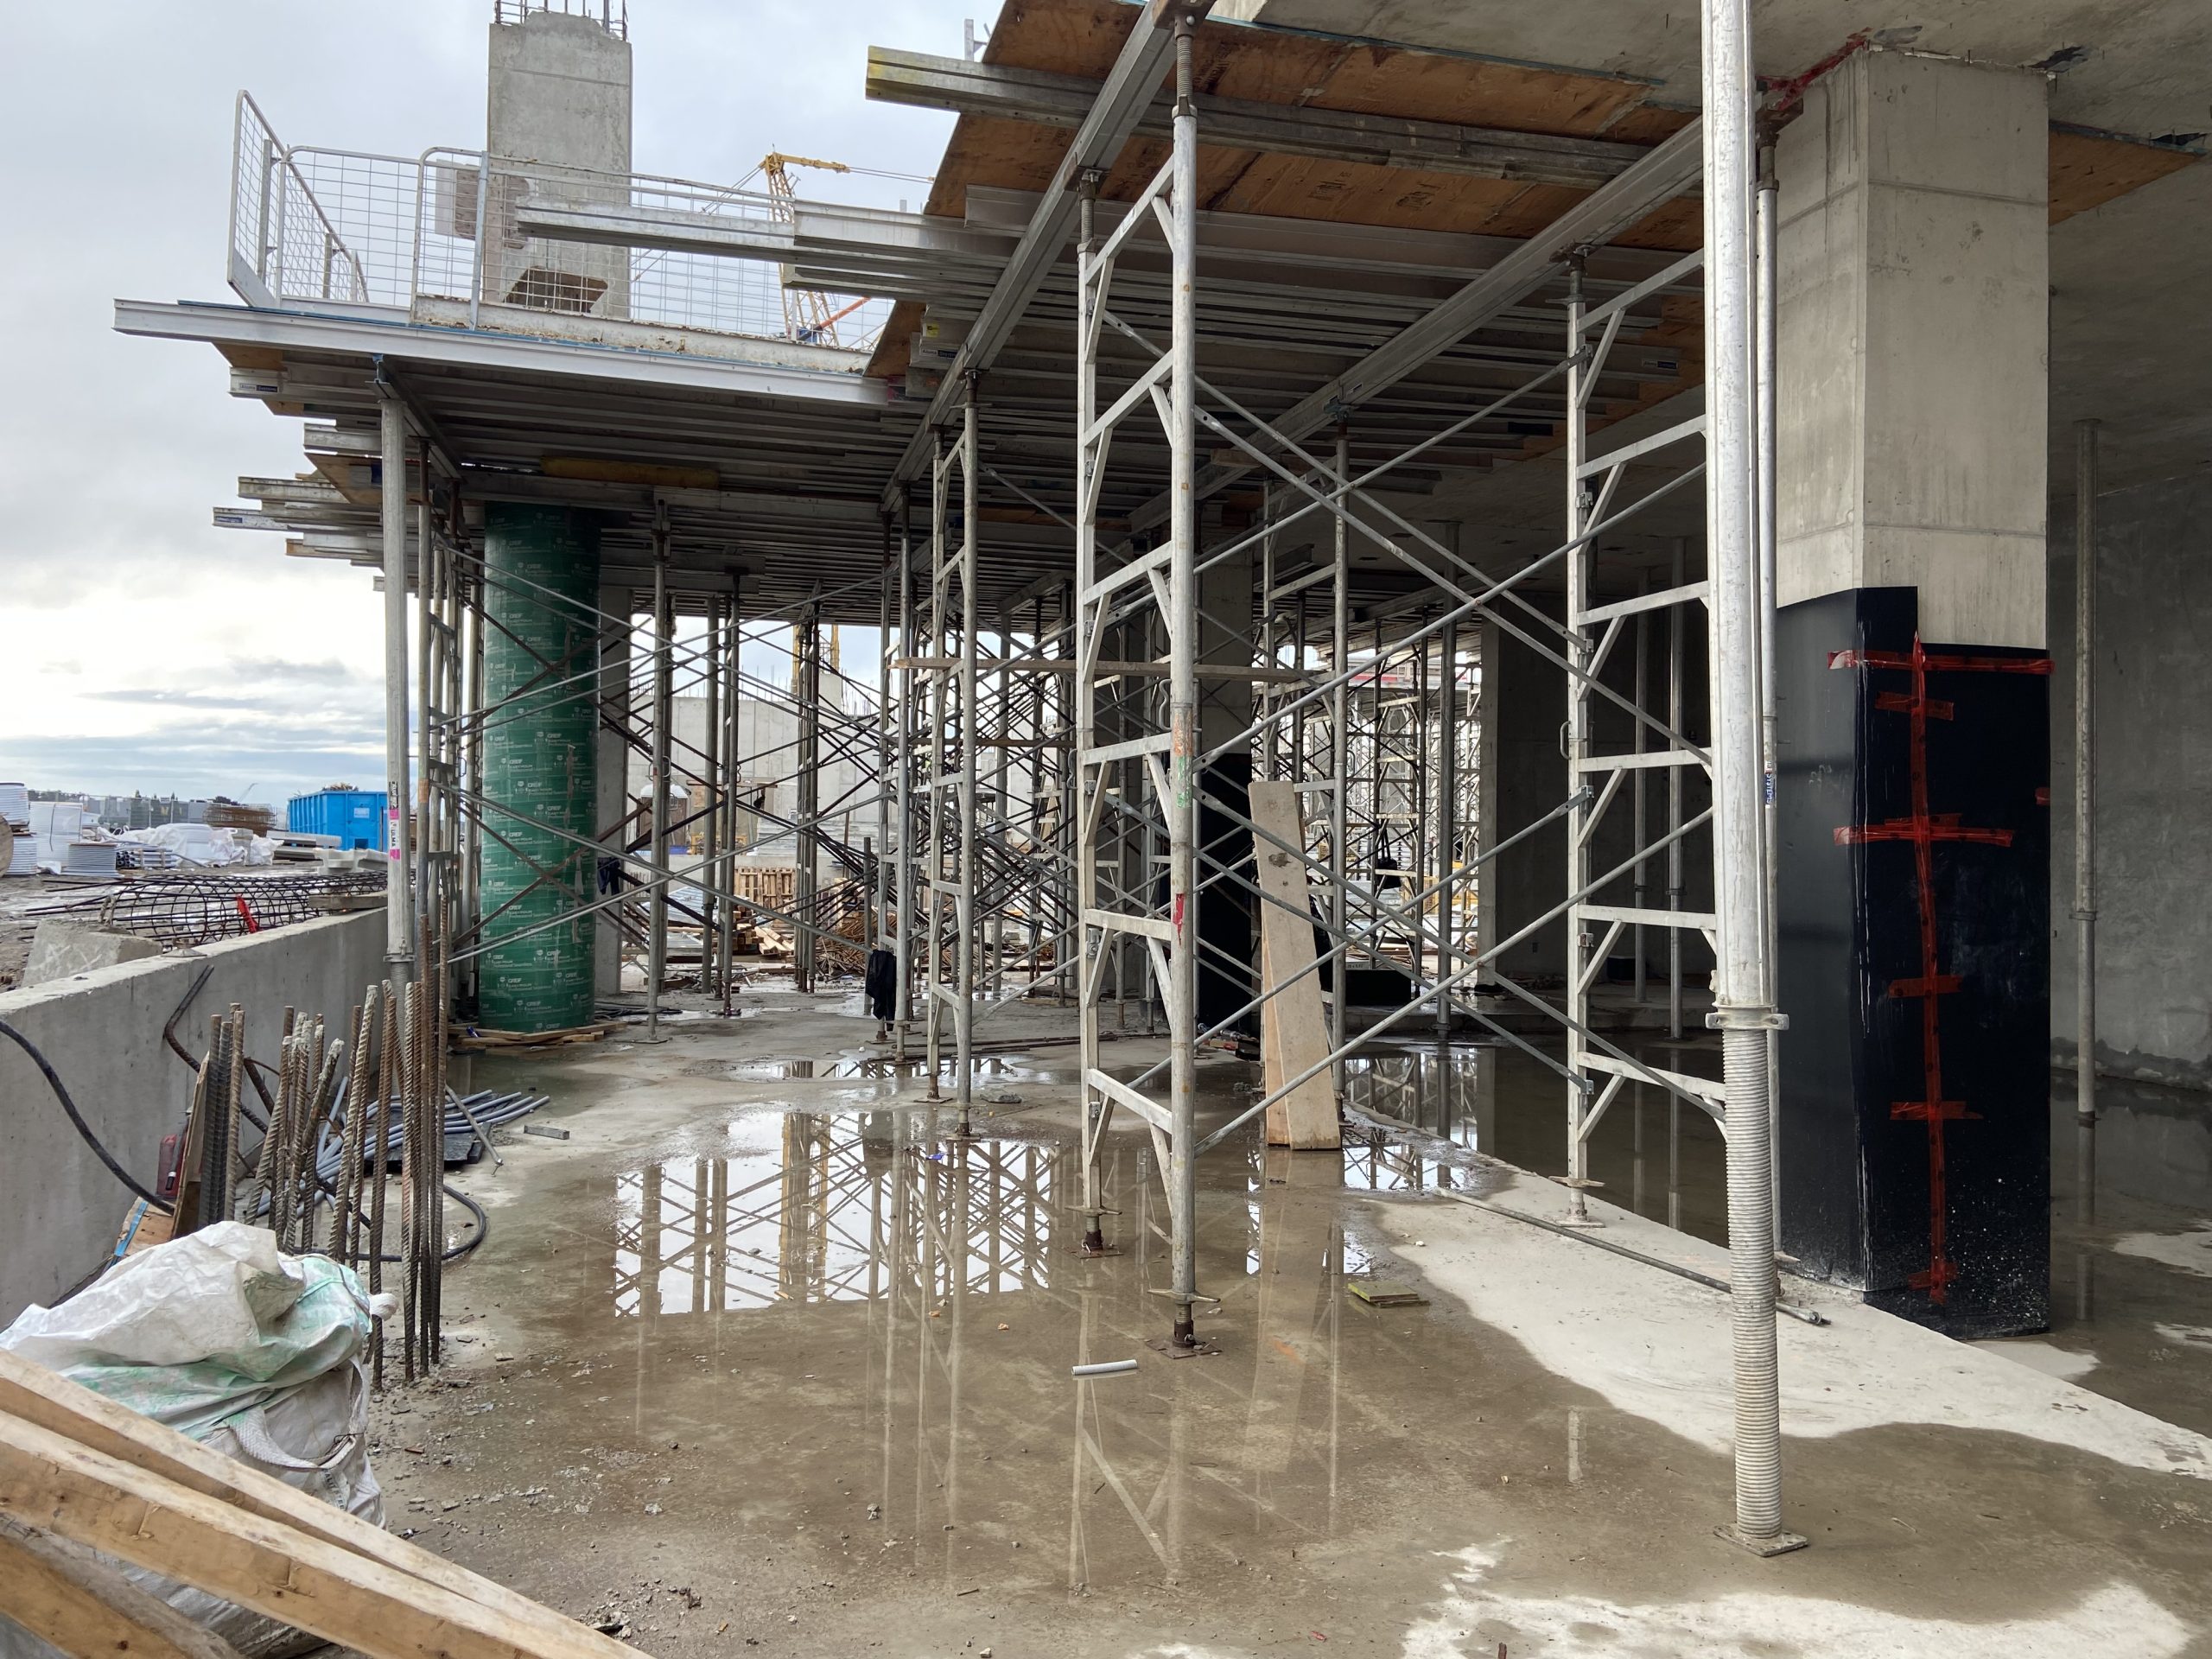 Photograph of the construction for the new East Bayfront Community Recreation Centre, looking south within the future main floor lobby area and dance studio on the right. The images show a construction site with steel scaffolding.